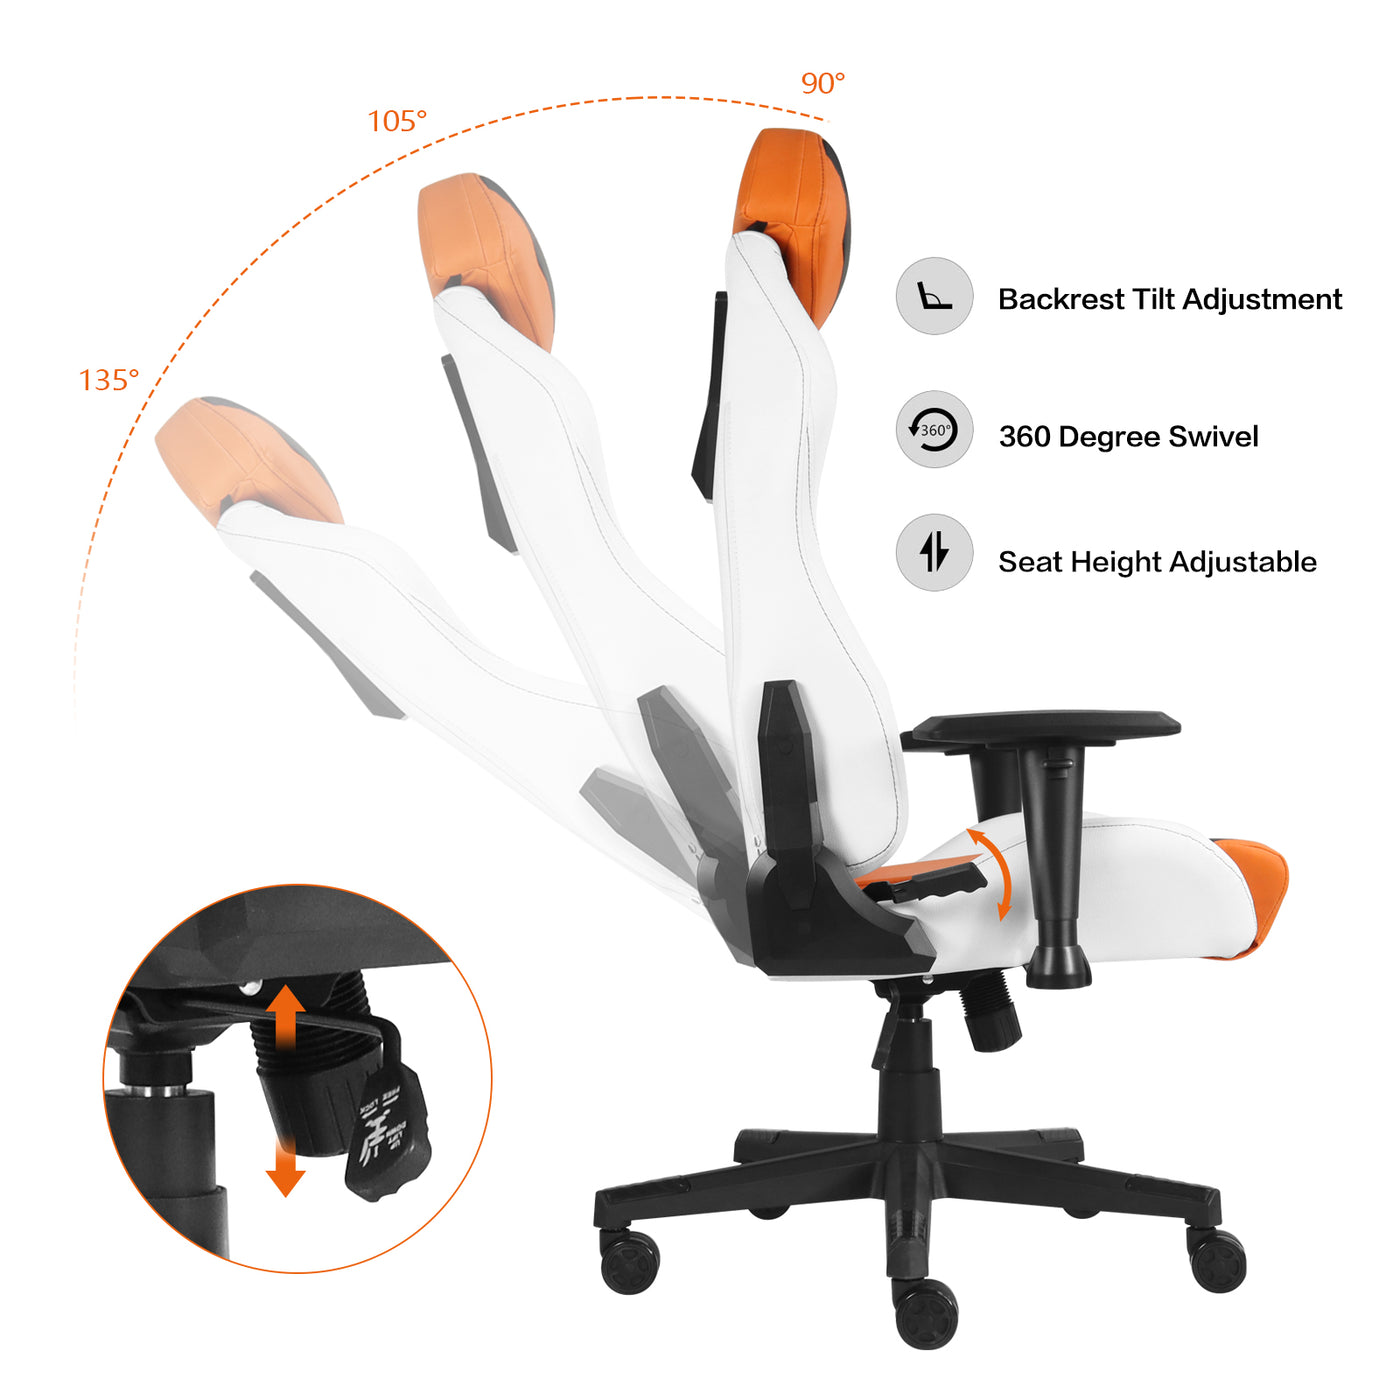 Ergonomic Gaming Chairs for Adults with High-Density Memory Foam | Swivel Comfortable Office Chair, Big and Tall Video Game Chair, High Back Computer Chair for Home, Office